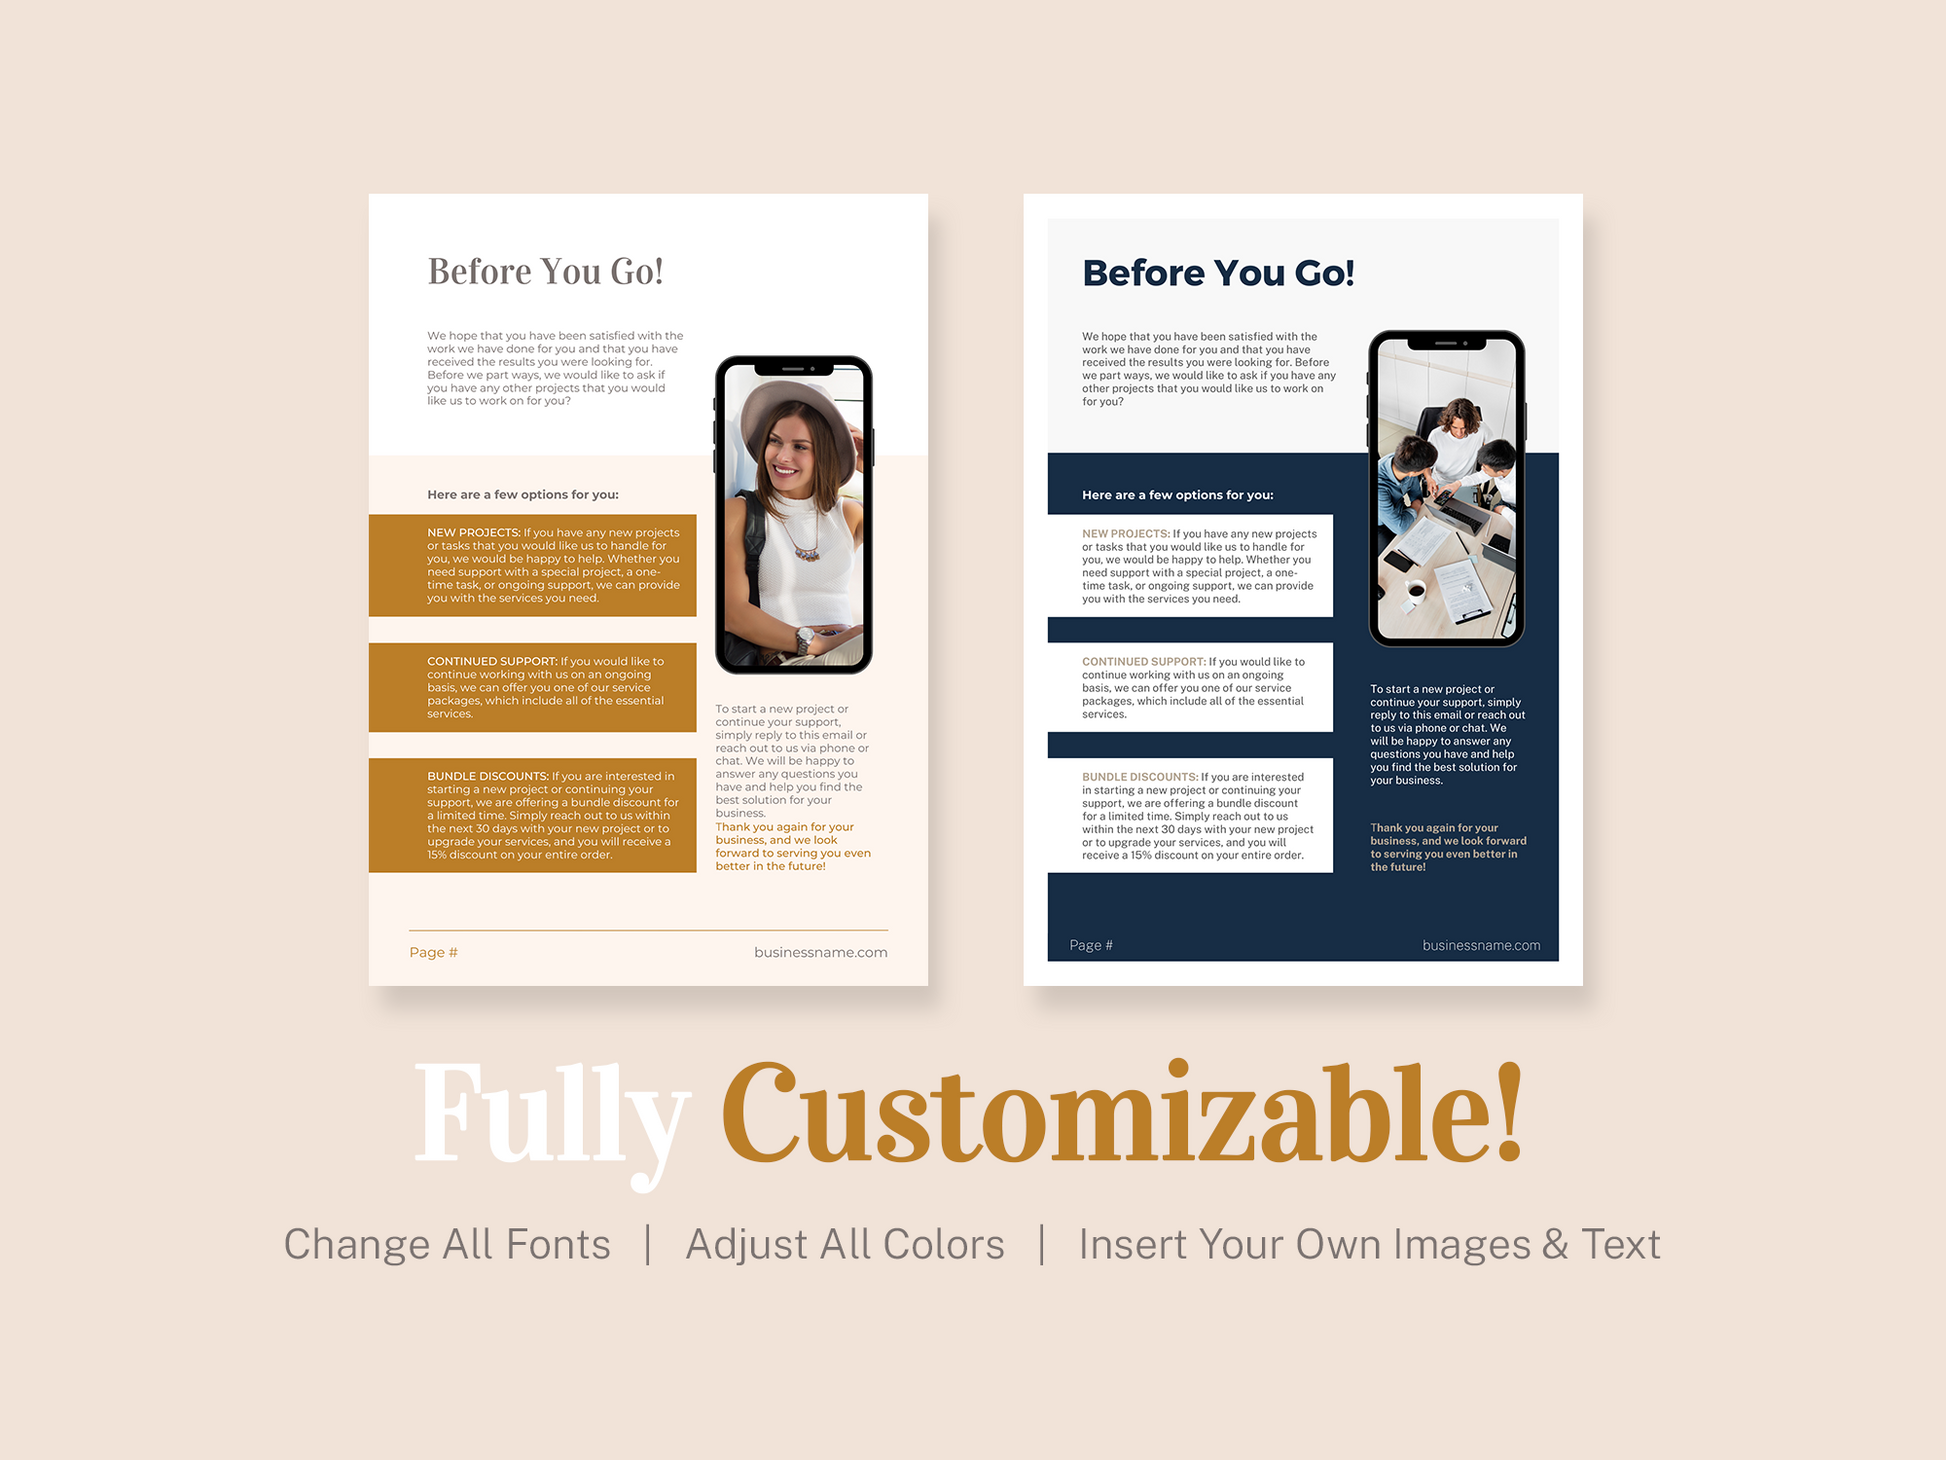 Client Goodbye Pack Template (Boho)